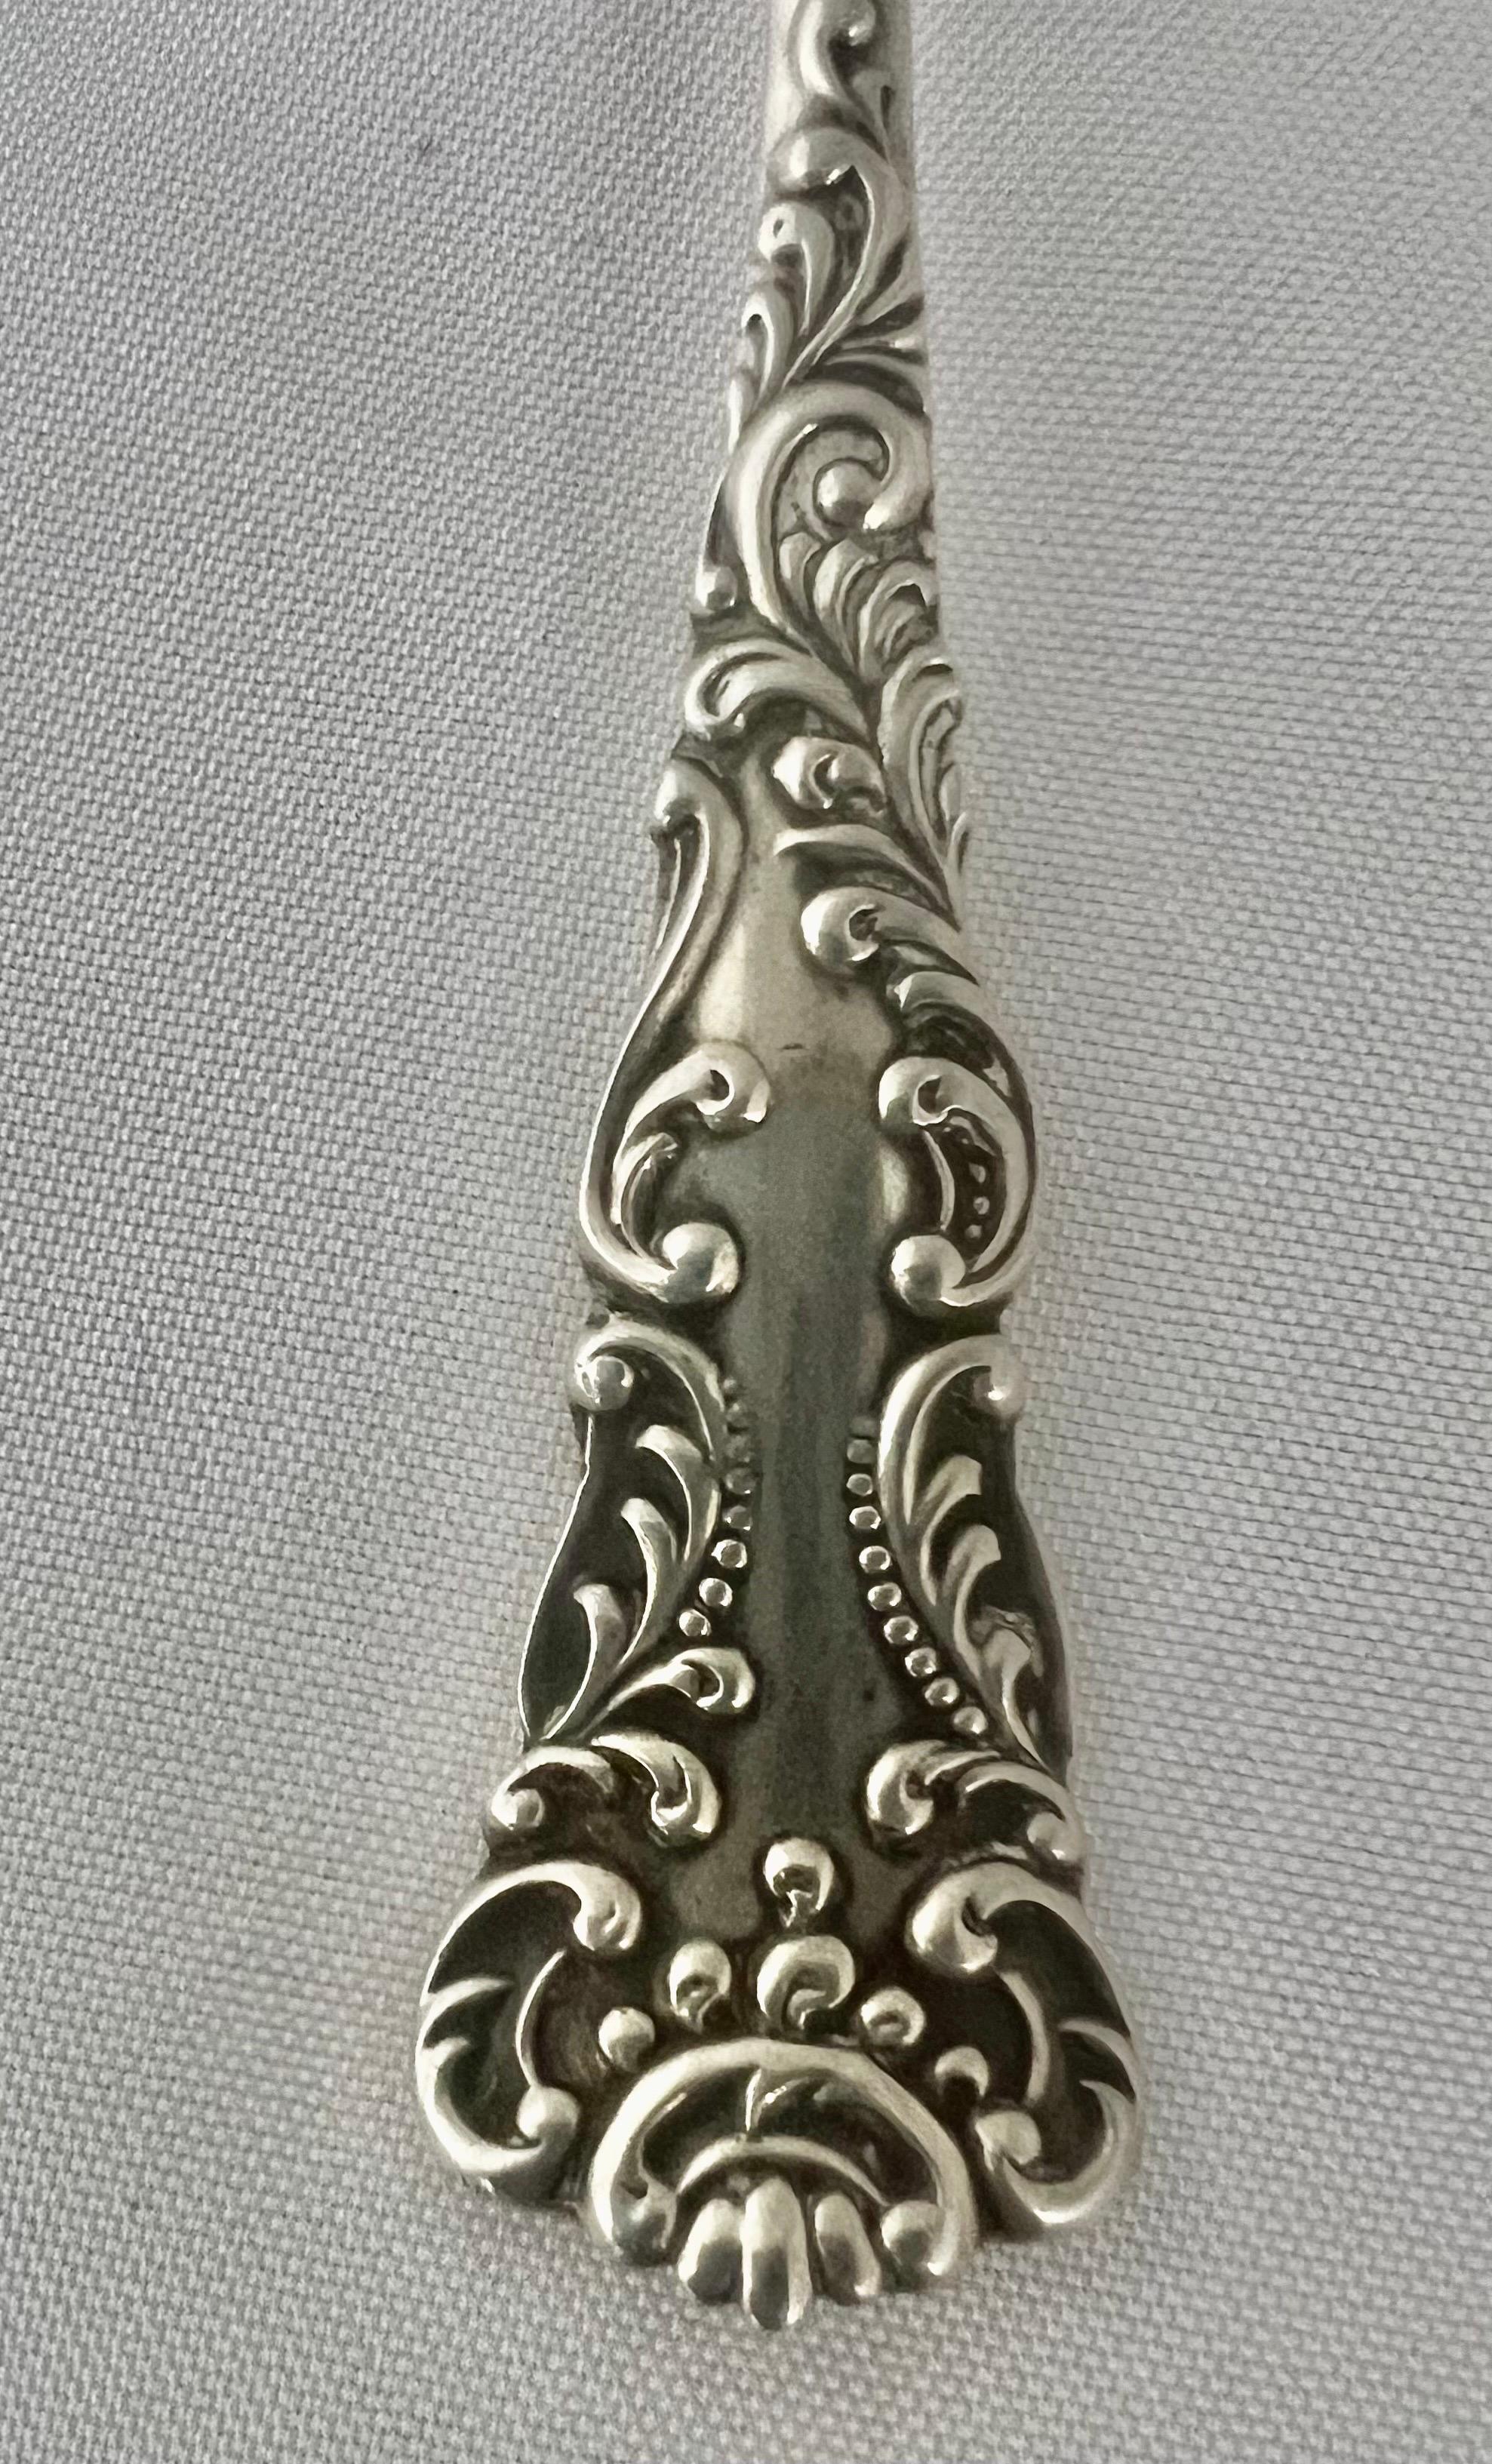 Ornate sterling silver berry spoon adorned with scrolled acanthus leaves.  A beautiful and intricate piece, perfect for elegant table settings or collector's of fine silver.